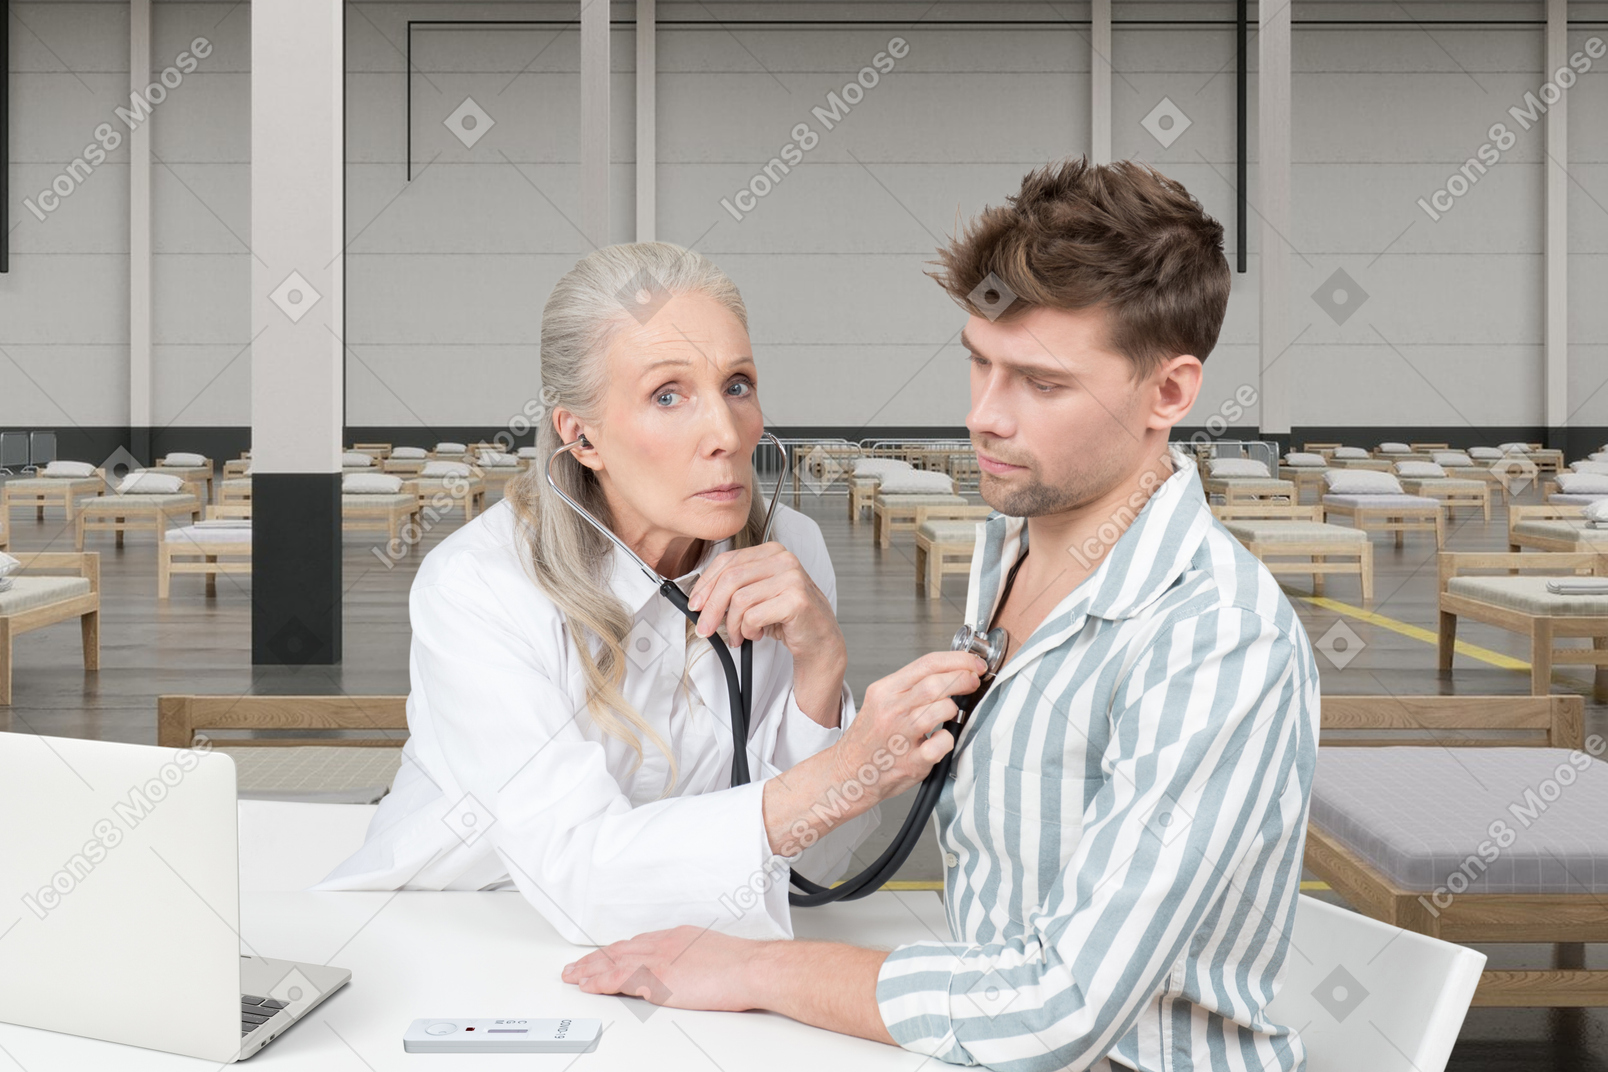 Doctor using a stethoscope on a patient